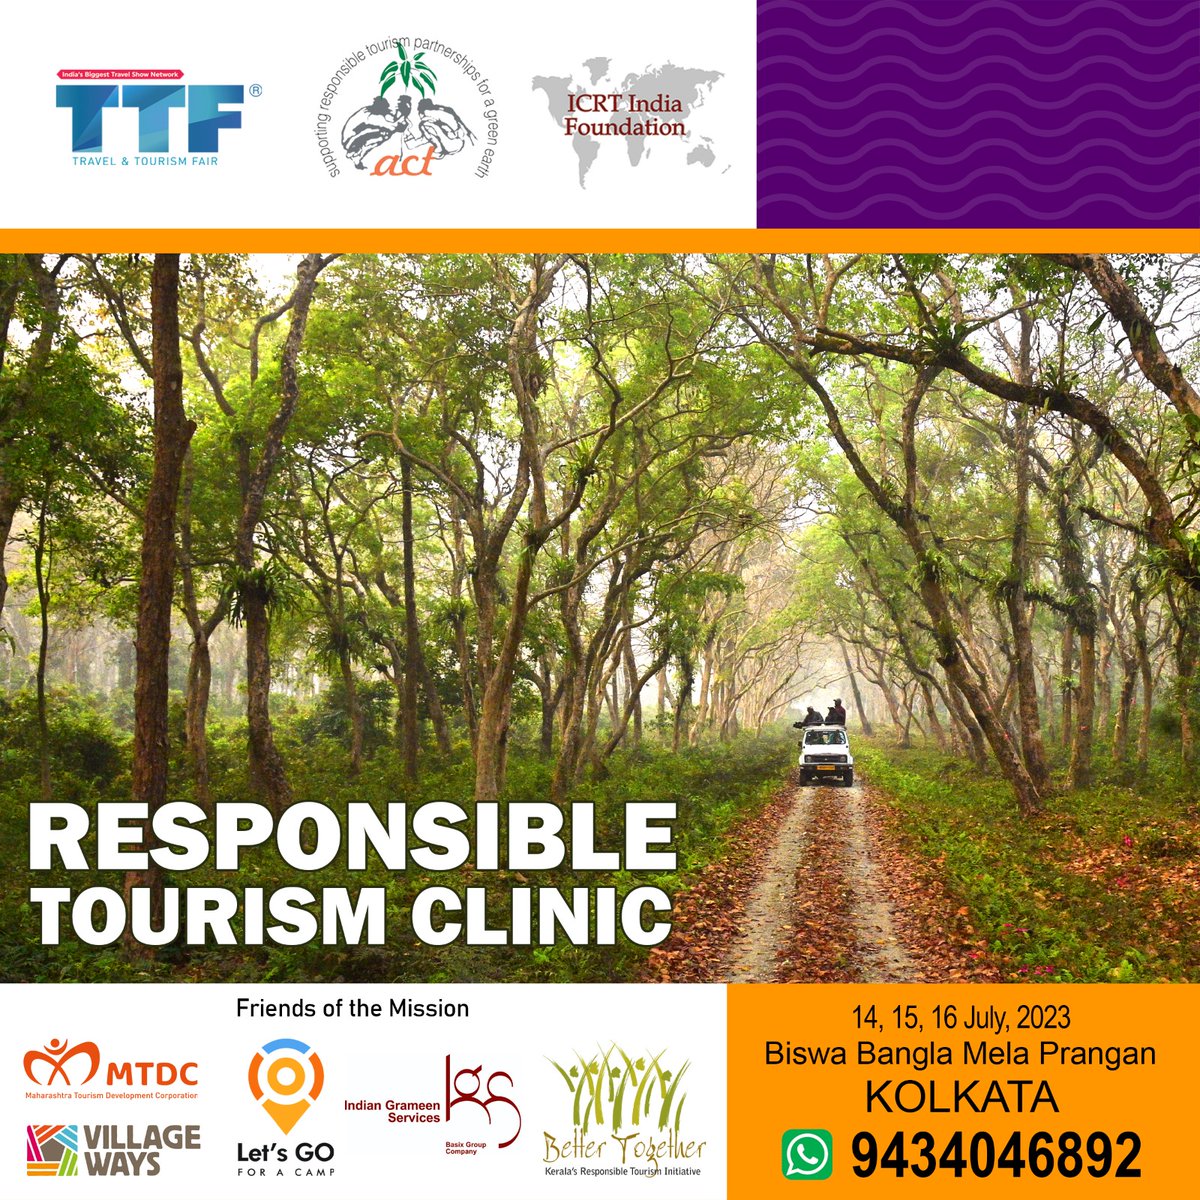 On #WorldNatureConservationDay2023, join us in celebrating the success of Mangalajodi Ecotourism! Through Responsible Tourism, we respect wildlife, use eco-friendly boats, & empower local communities with employment opportunities. This has been advocated at Travel & Tourism Fair.